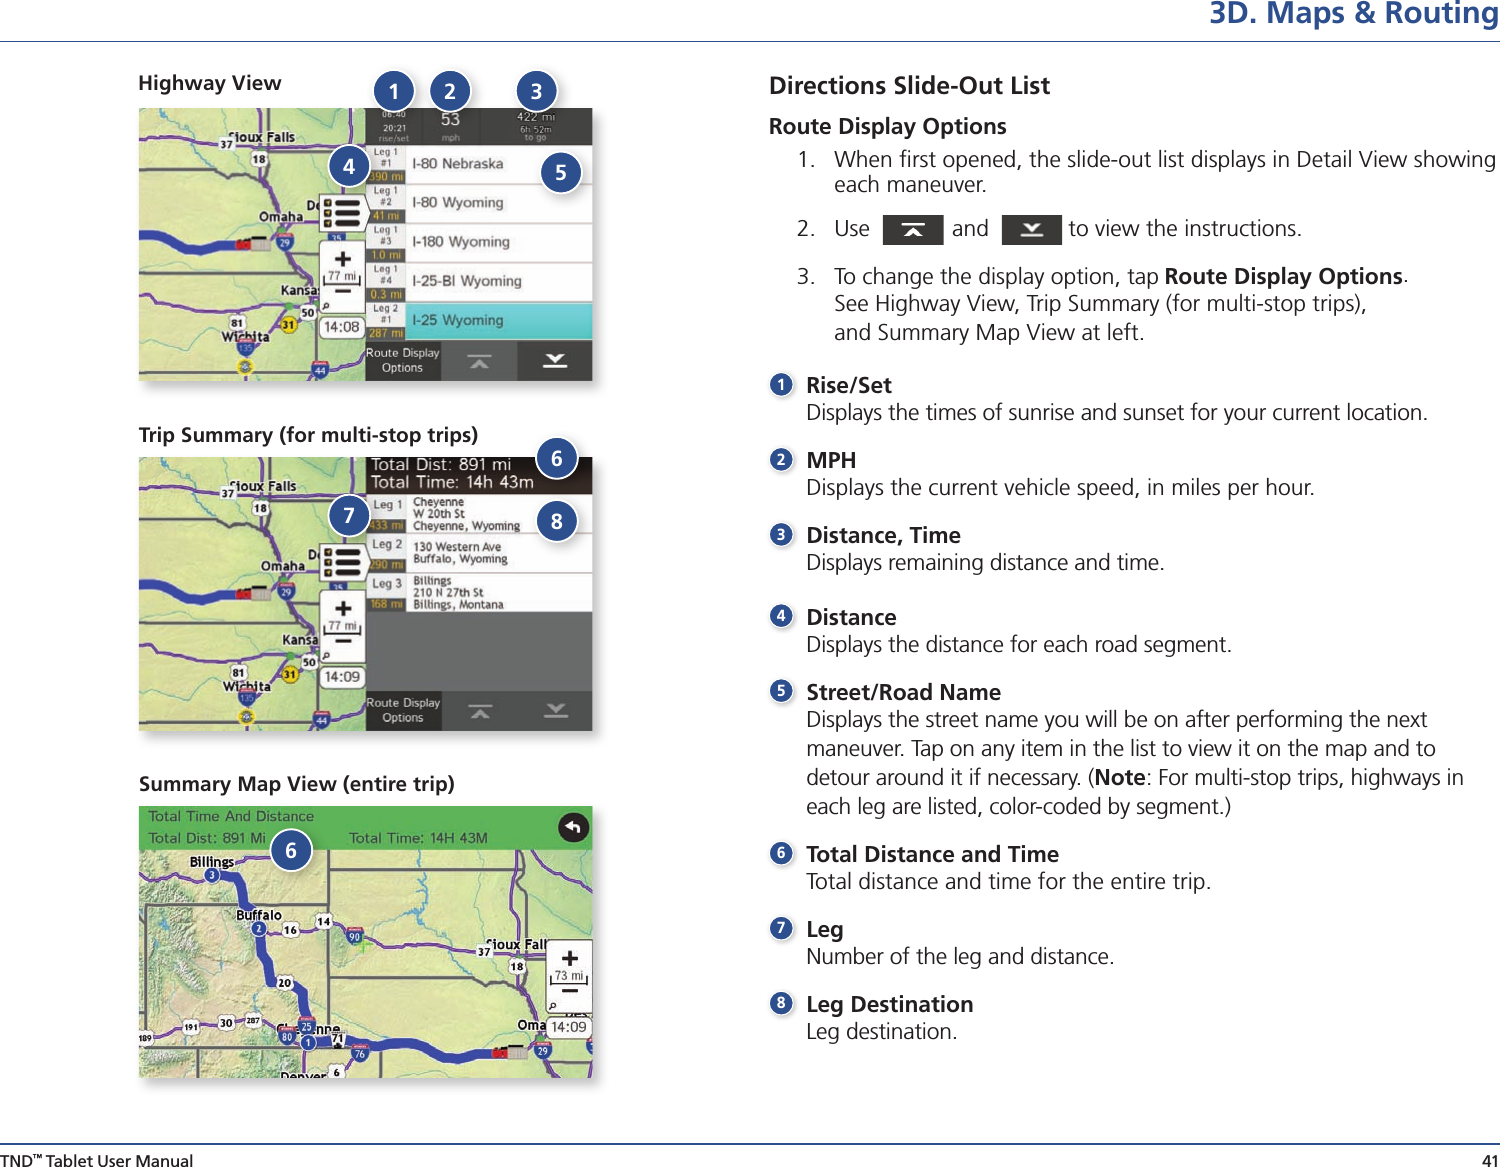 TND™ Tablet User Manual 413D. Maps &amp; RoutingDirections Slide-Out List  Route Display Options   1.  When ﬁrst opened, the slide-out list displays in Detail View showing each maneuver.2.   Use     and    to view the instructions.3.  To change the display option, tap Route Display Options.  See Highway View, Trip Summary (for multi-stop trips),  and Summary Map View at left. 1 Rise/Set   Displays the times of sunrise and sunset for your current location.2  MPH  Displays the current vehicle speed, in miles per hour.3 Distance, Time  Displays remaining distance and time.  4   Distance    Displays the distance for each road segment.5   Street/Road  Name   Displays the street name you will be on after performing the next  maneuver. Tap on any item in the list to view it on the map and to  detour around it if necessary. (Note: For multi-stop trips, highways in each leg are listed, color-coded by segment.)6 Total Distance and Time  Total distance and time for the entire trip.7   Leg   Number of the leg and distance.8    Leg  Destination  Leg destination.Trip Summary (for multi-stop trips)Highway View 1 2 345678Summary Map View (entire trip)6